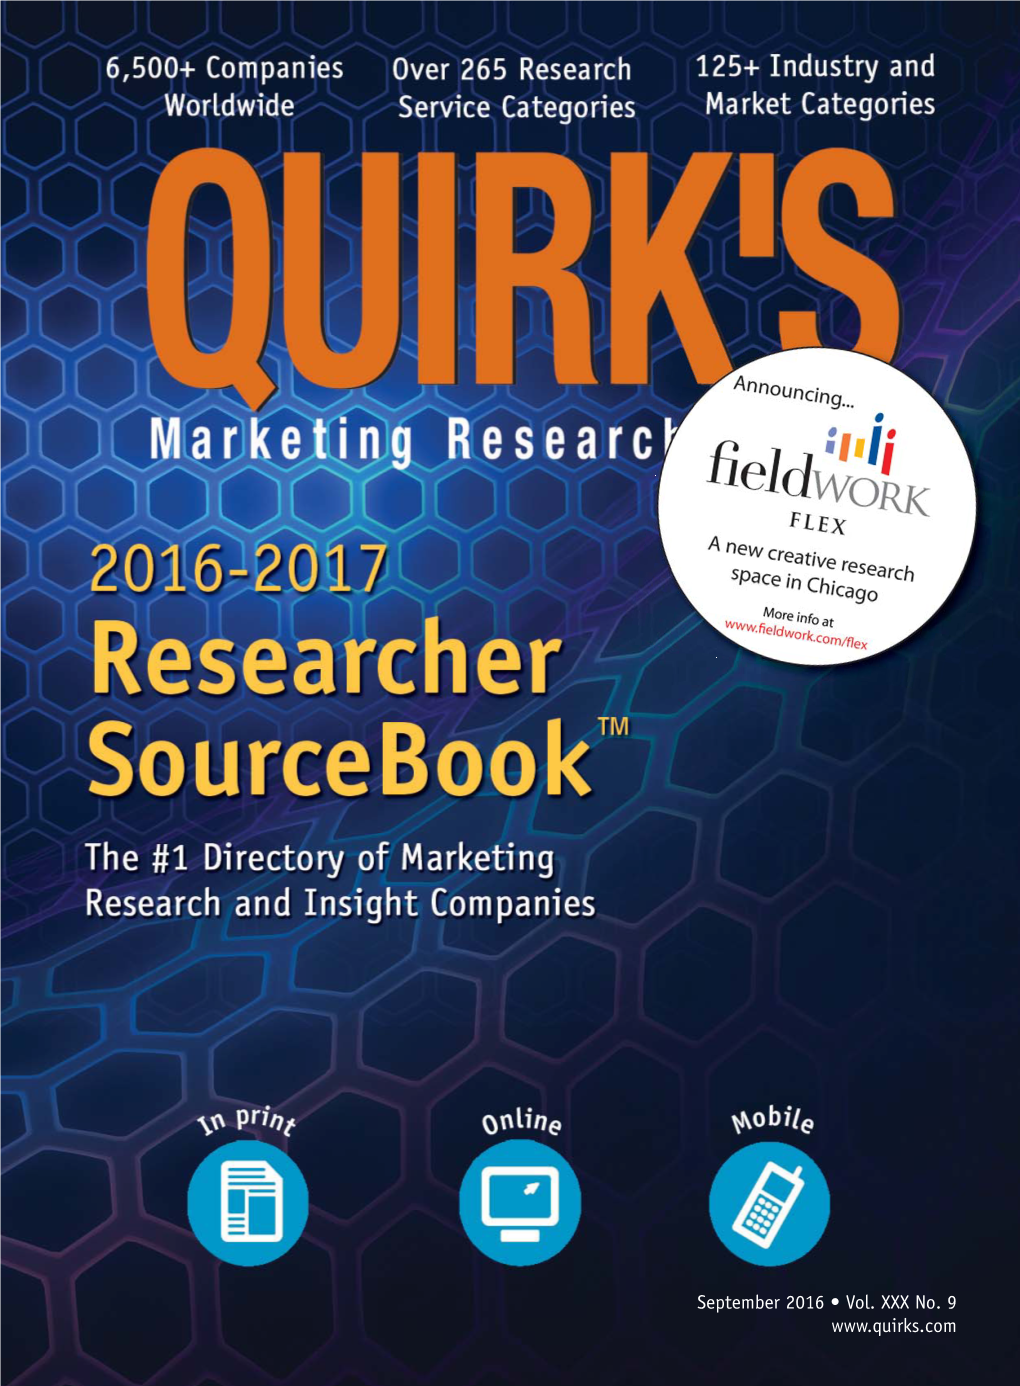 2016-2017 Researcher Sourcebook® SSI Reaches Your B2b Targets